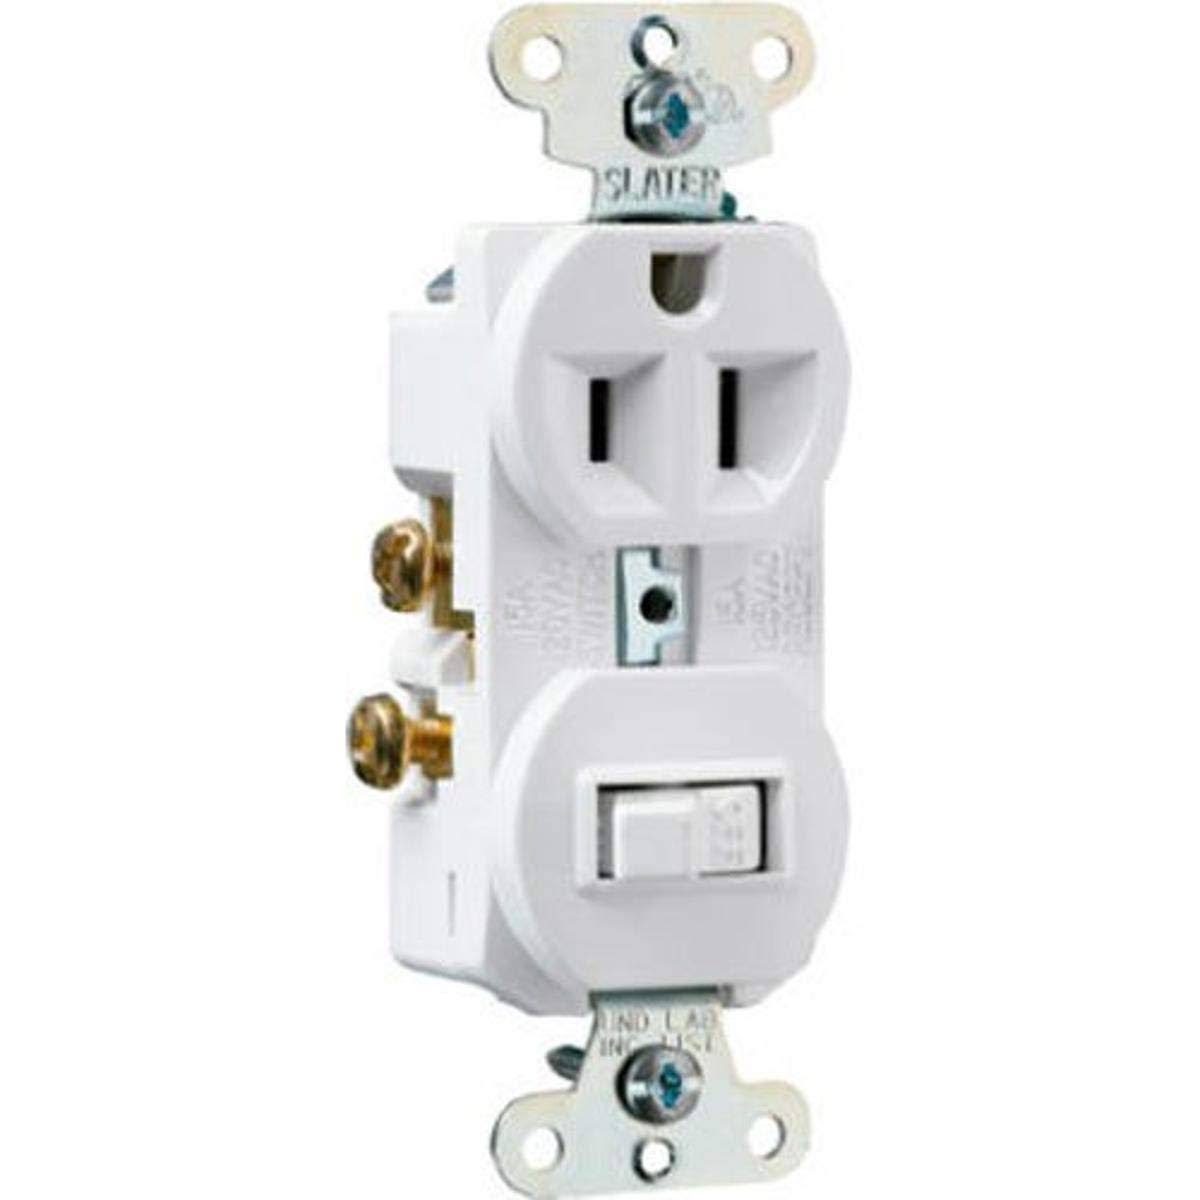 Pass and Seymour Combination Switch and Outlet - White, 2 Pole, 15 Amp